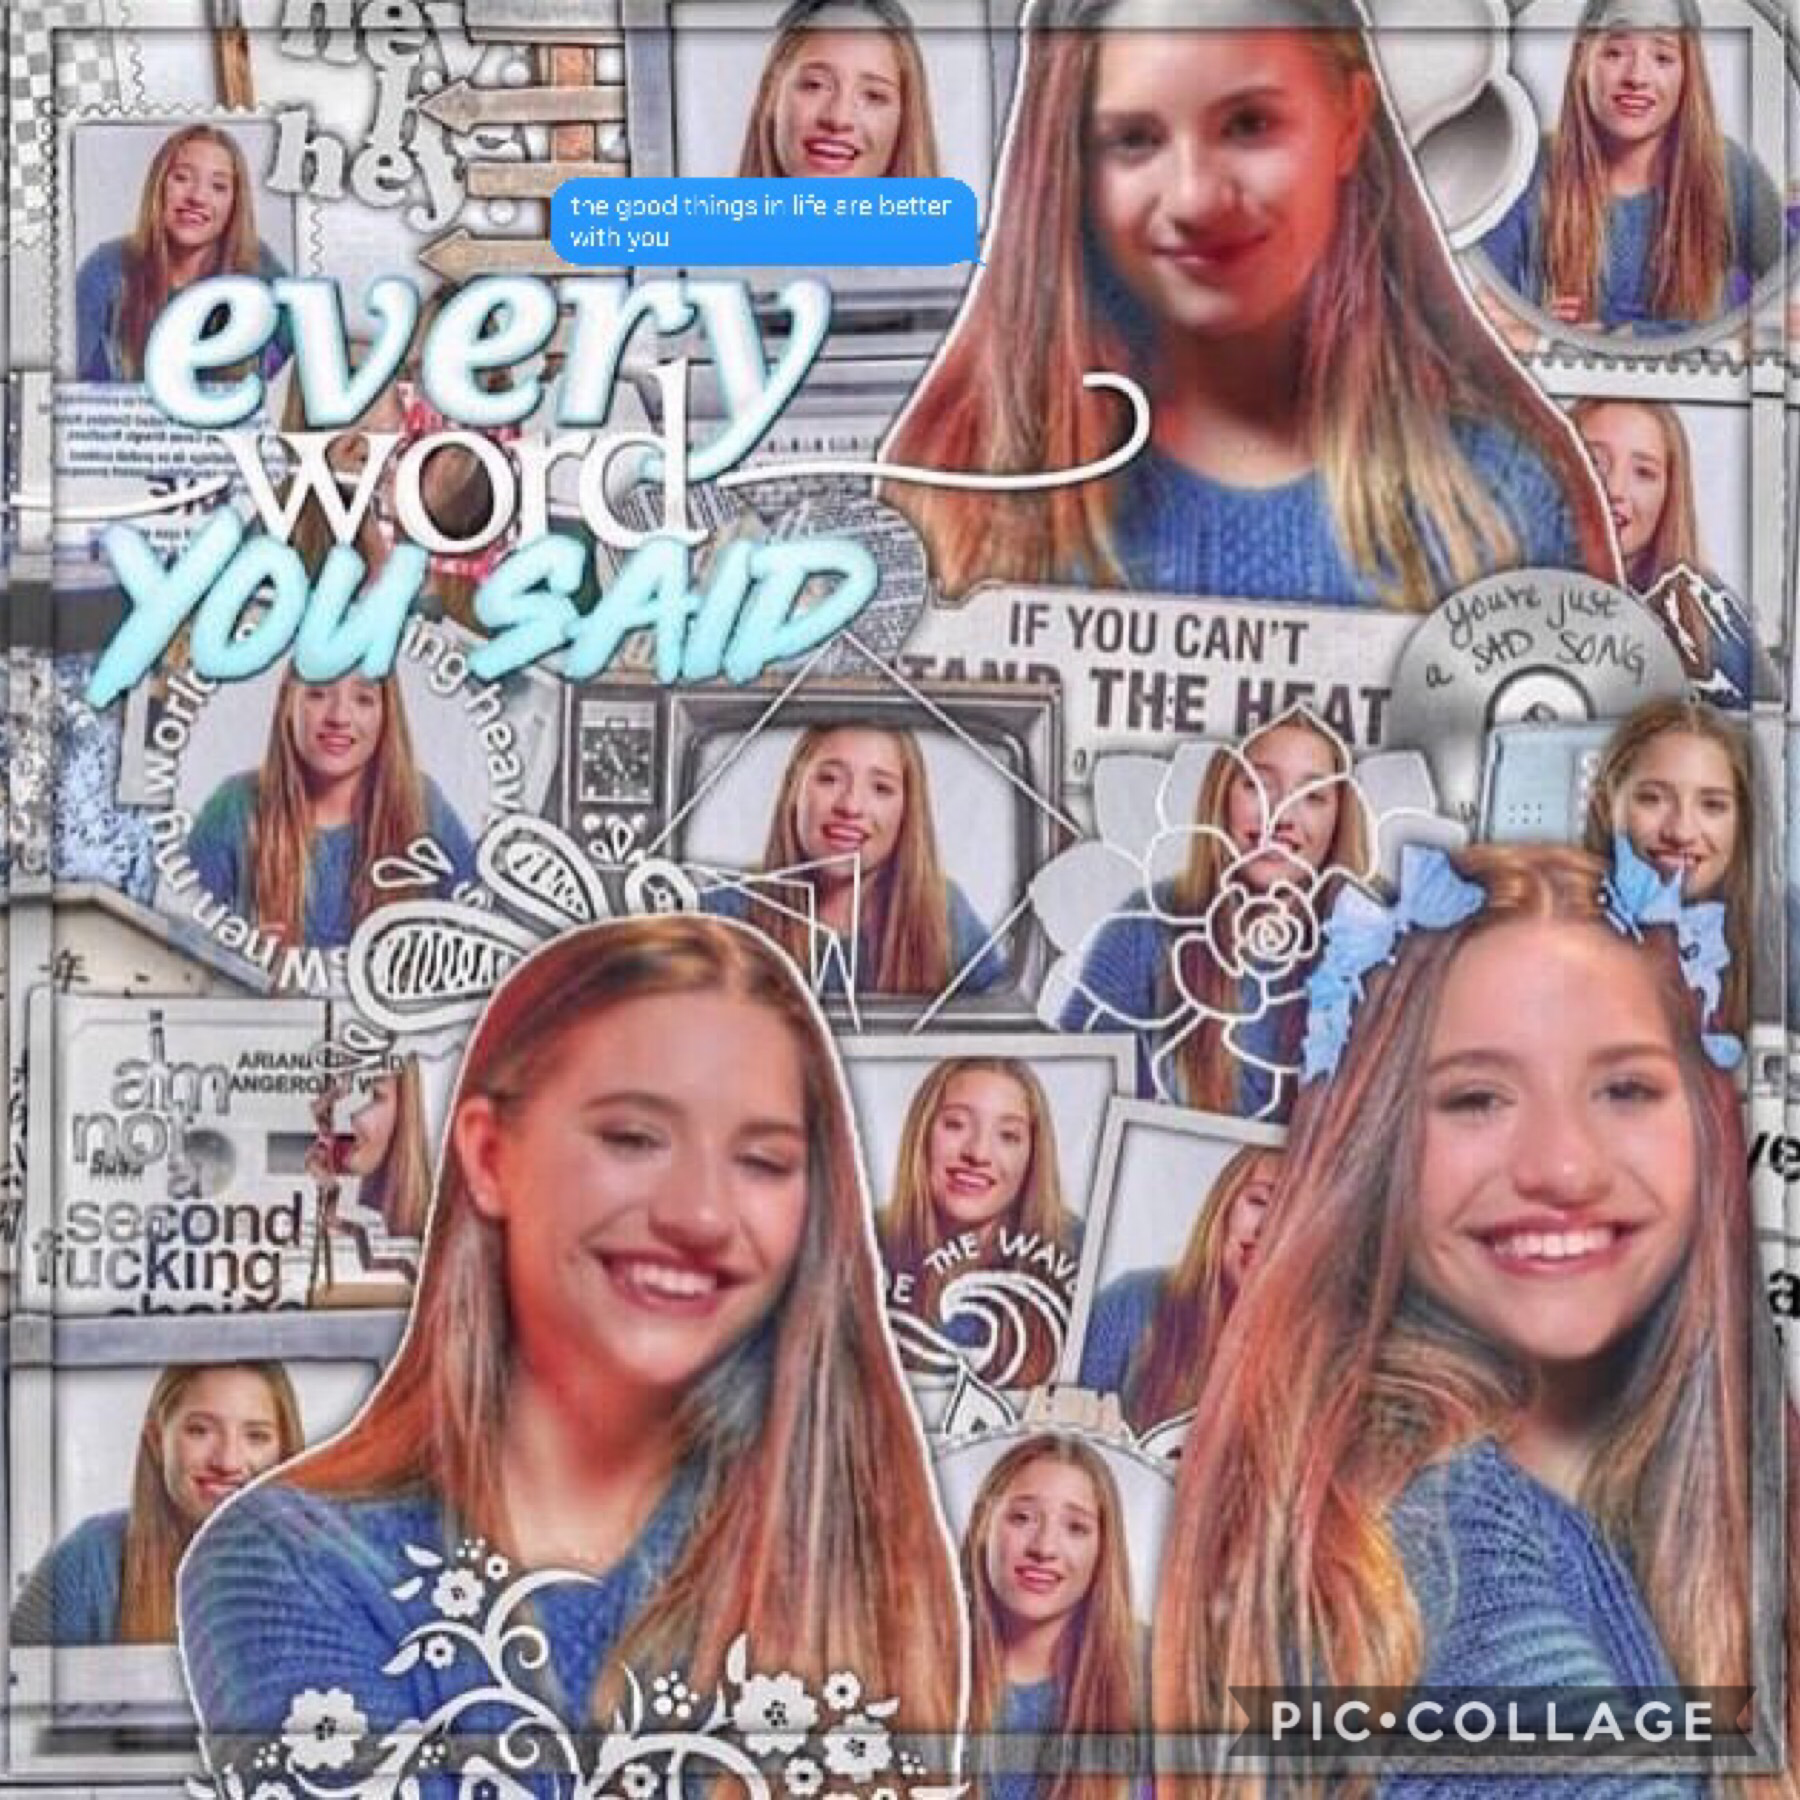 💙Tap💙

Another Mackenzie edit!!!
Rate 1-10!!!
Qotd: What is your favorite song by Mackenzie
Aotd: Breathe